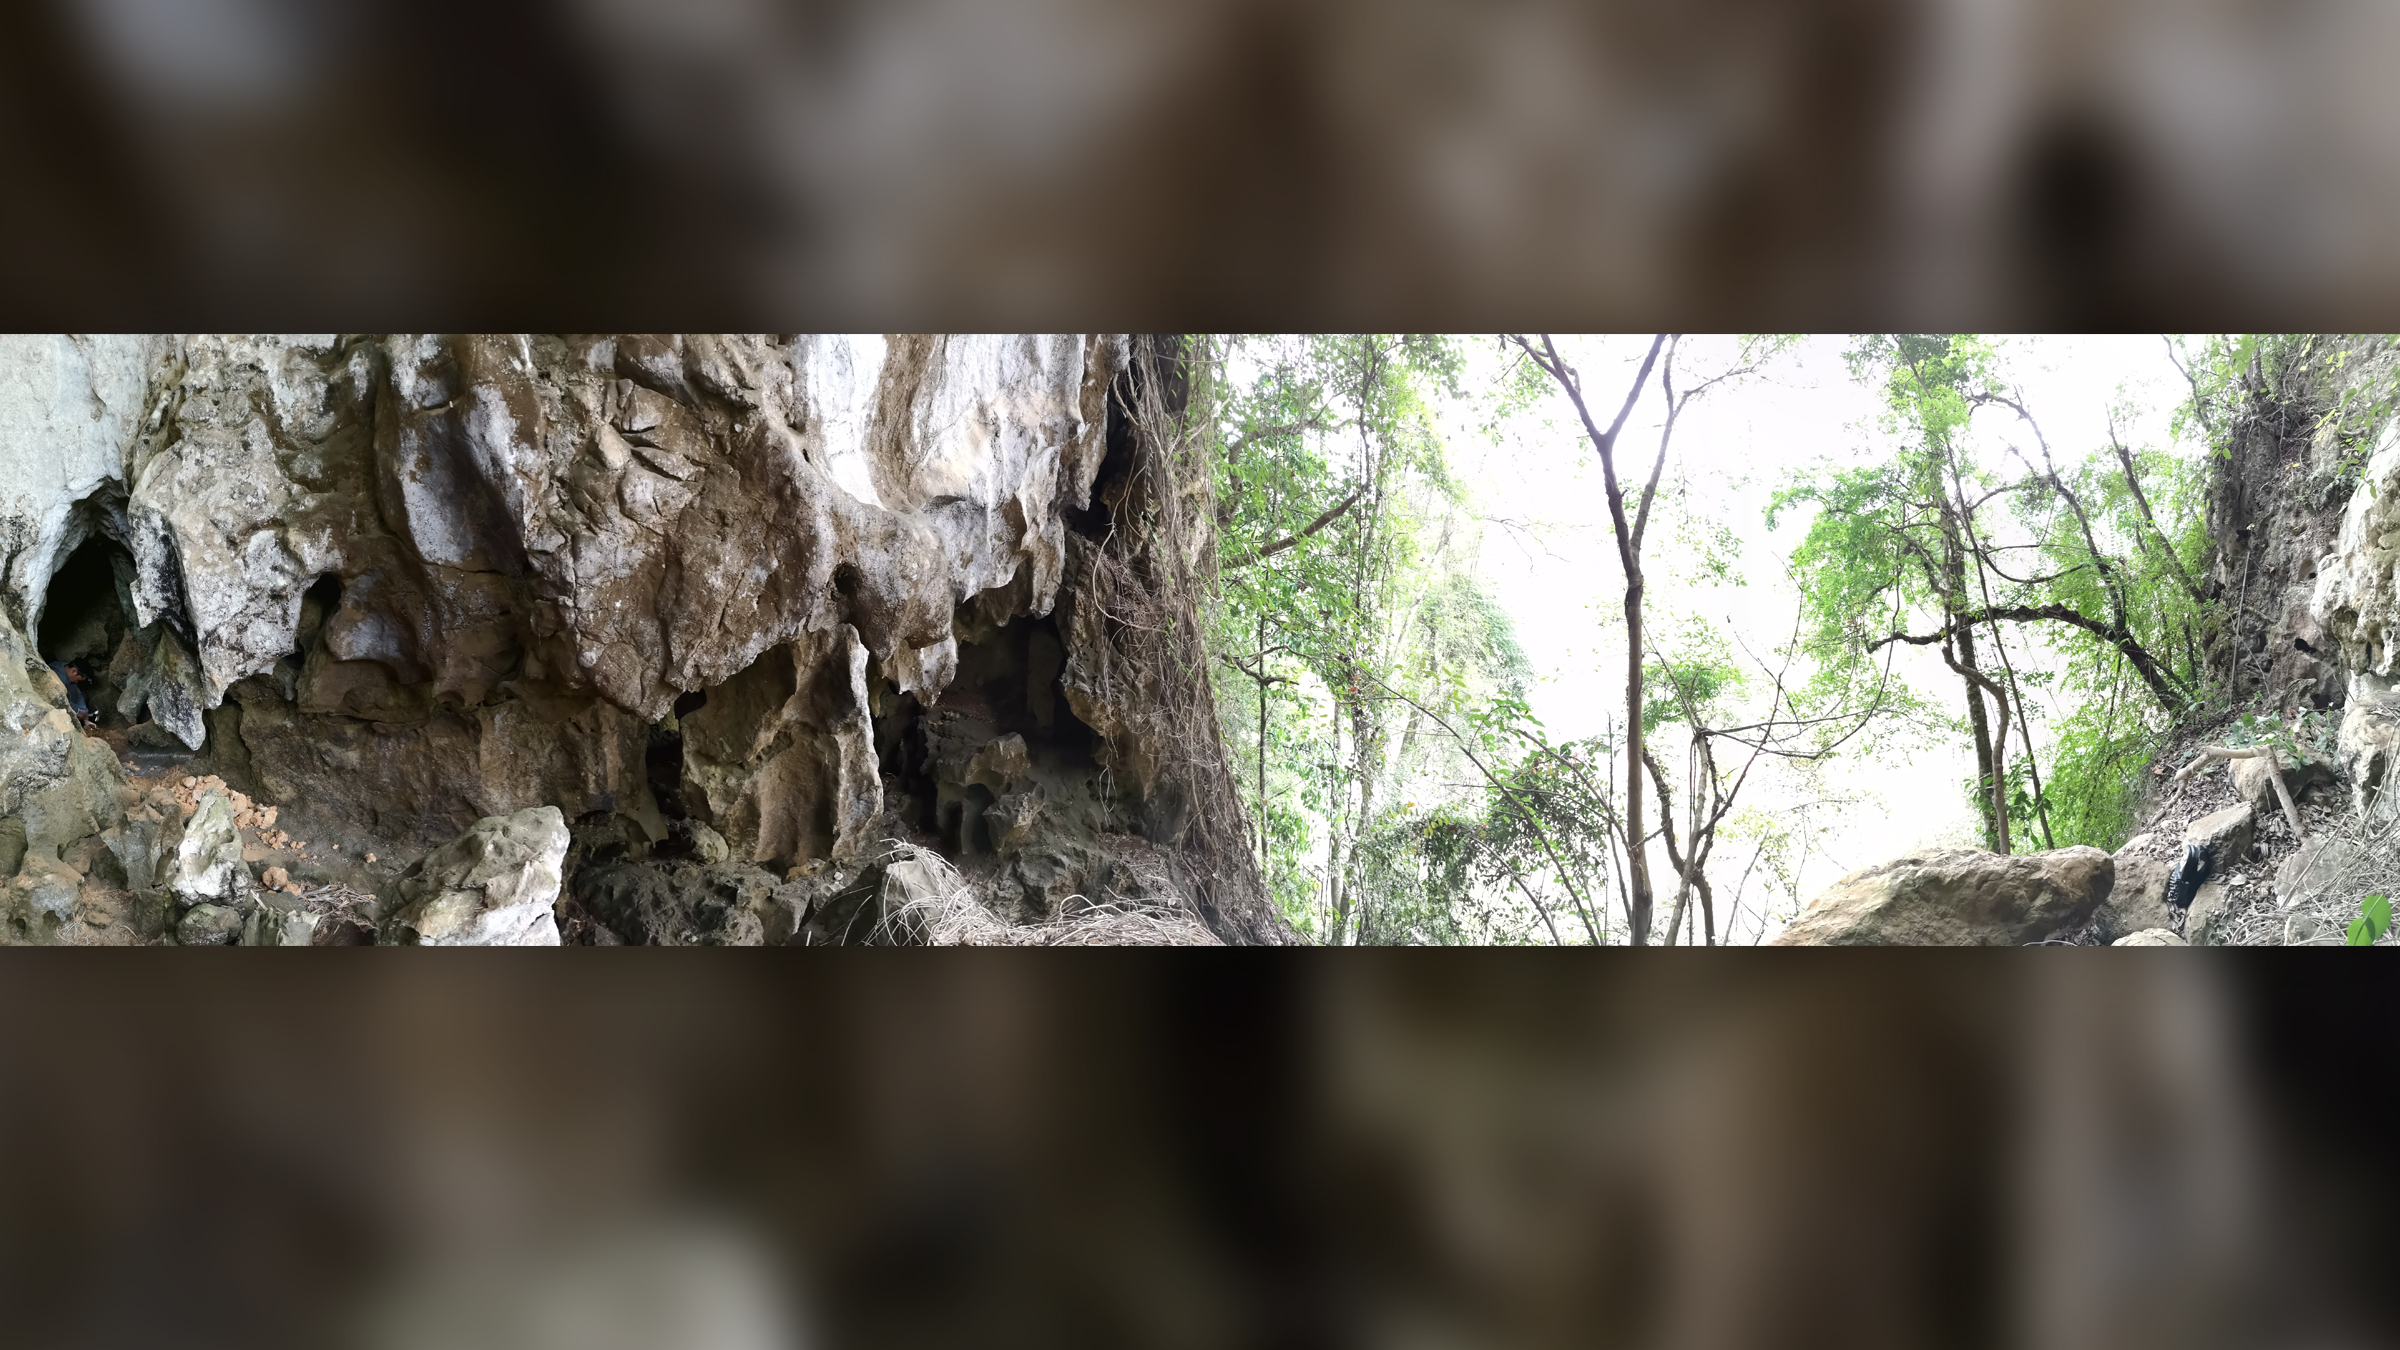 This panorama shows Ngu Hao 2 (Cobra Cave) in northern Laos. The cave's entrance is on the left.